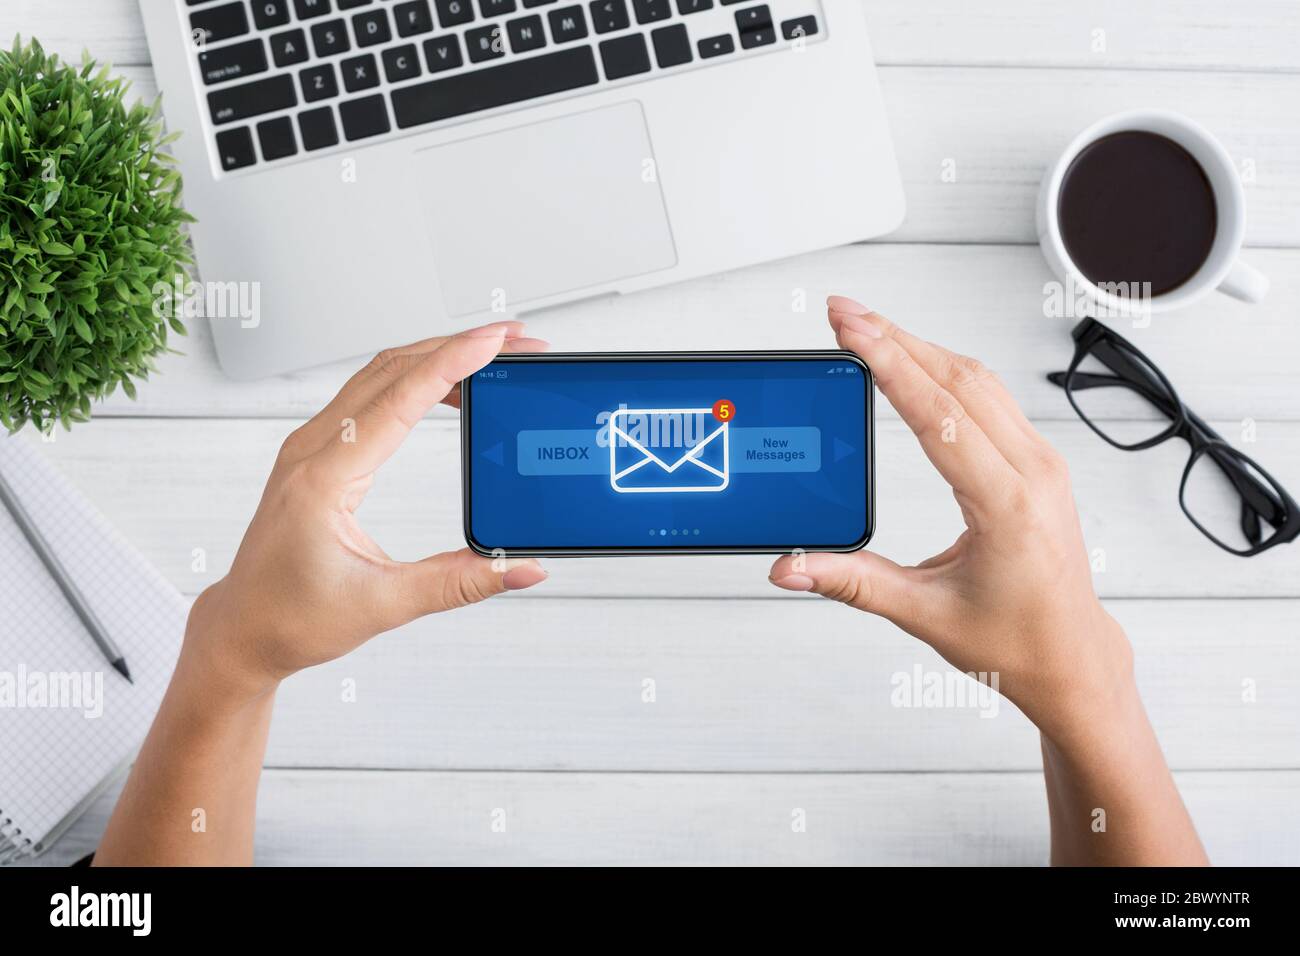 Unrecognizable Female Holding Smartphone With New Inbox Messages Notification On Screen Stock Photo